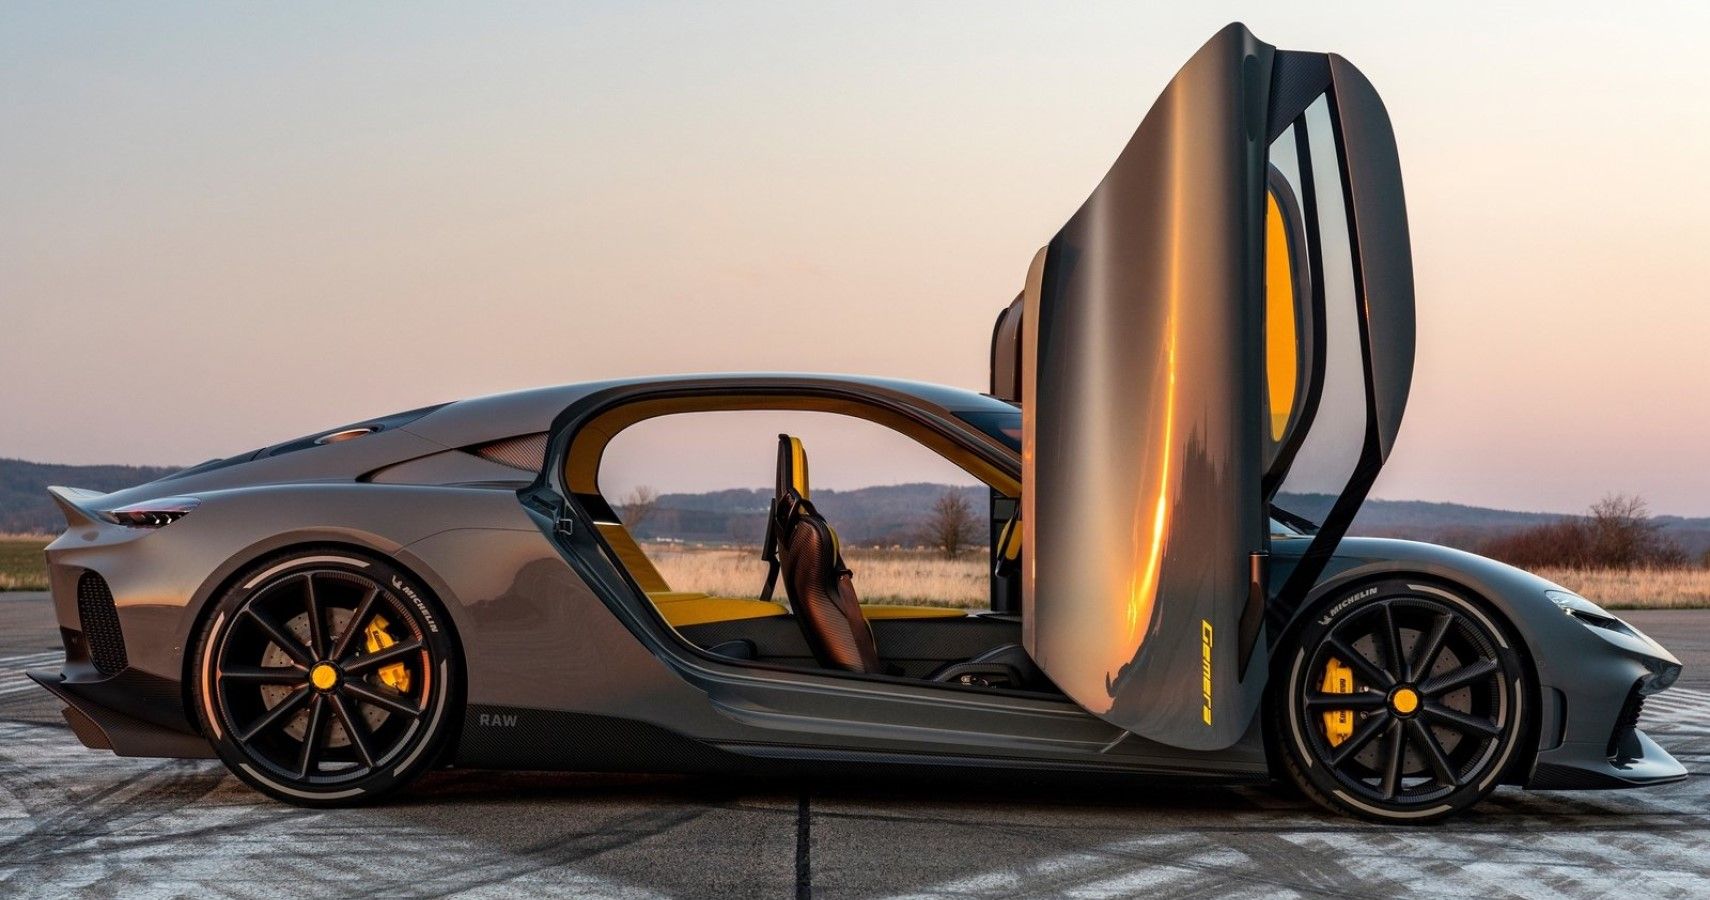 The Interior Of The Koenigsegg Gemera Hypercar Is Simply Breathtaking